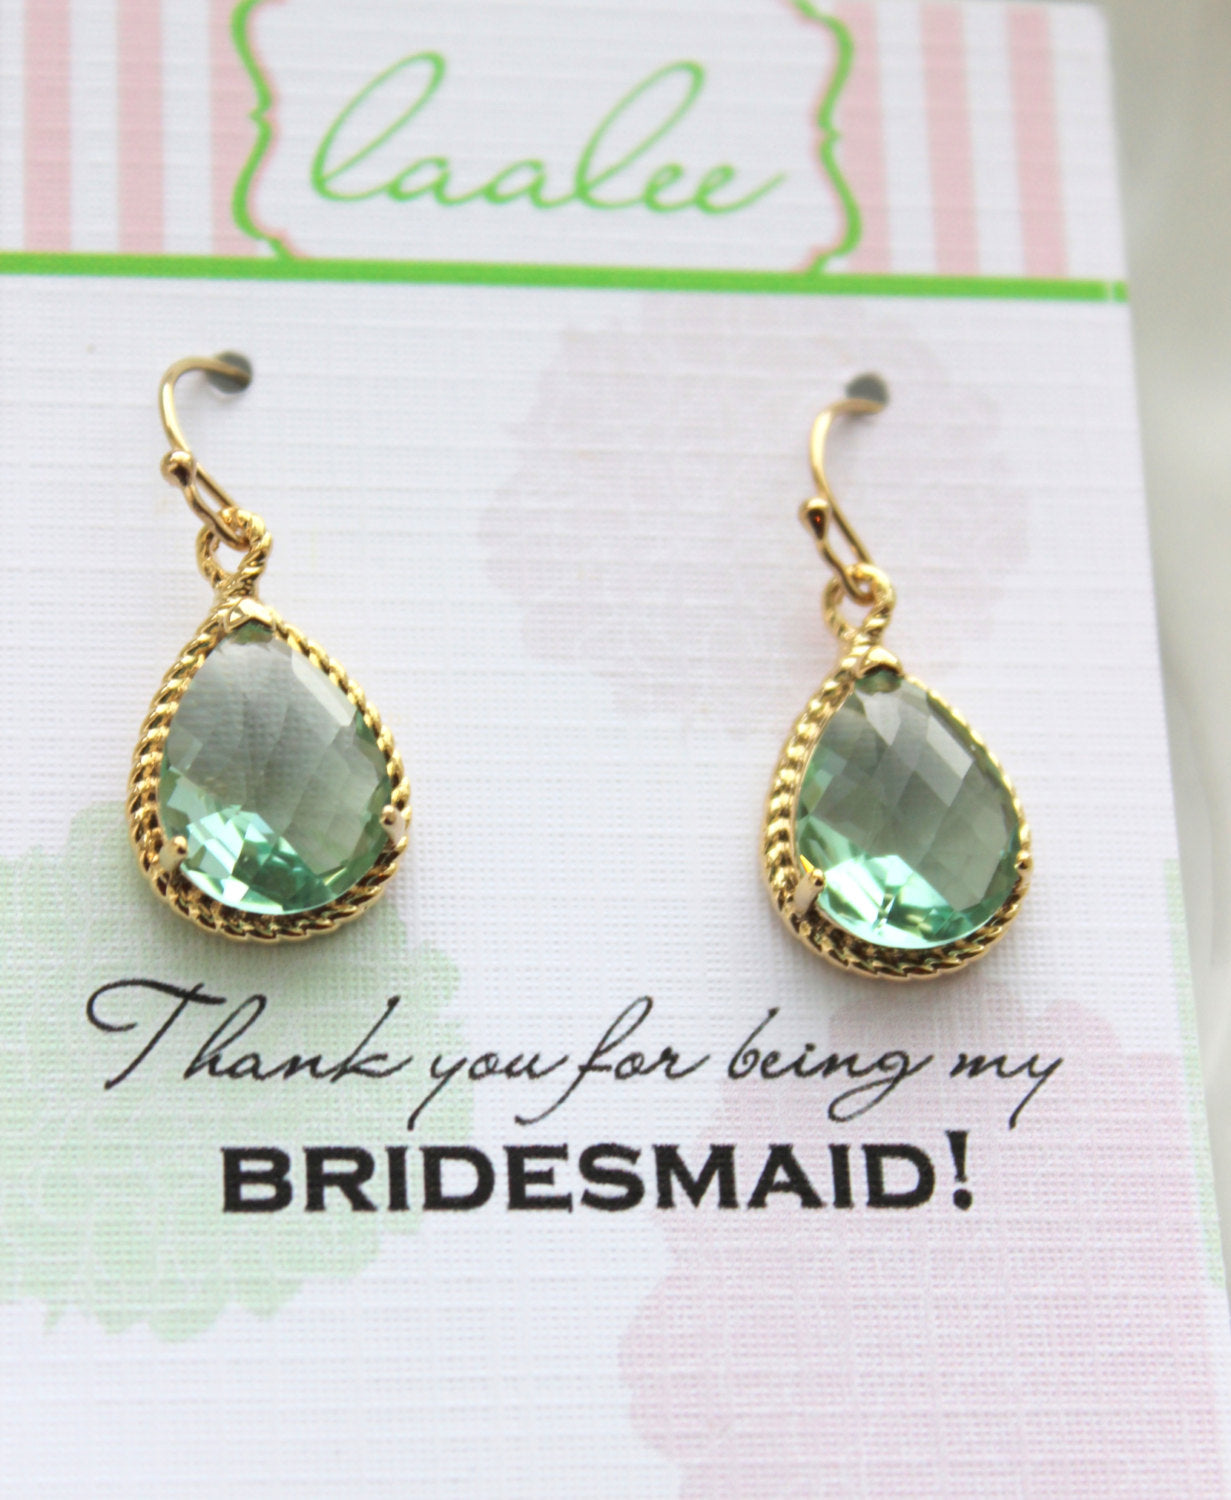 Gold Prasiolite Earrings Light Green Wedding Jewelry Prasiolite Green Bridesmaid Earrings Gift Bridal Jewelry Personalized Gift Under 25